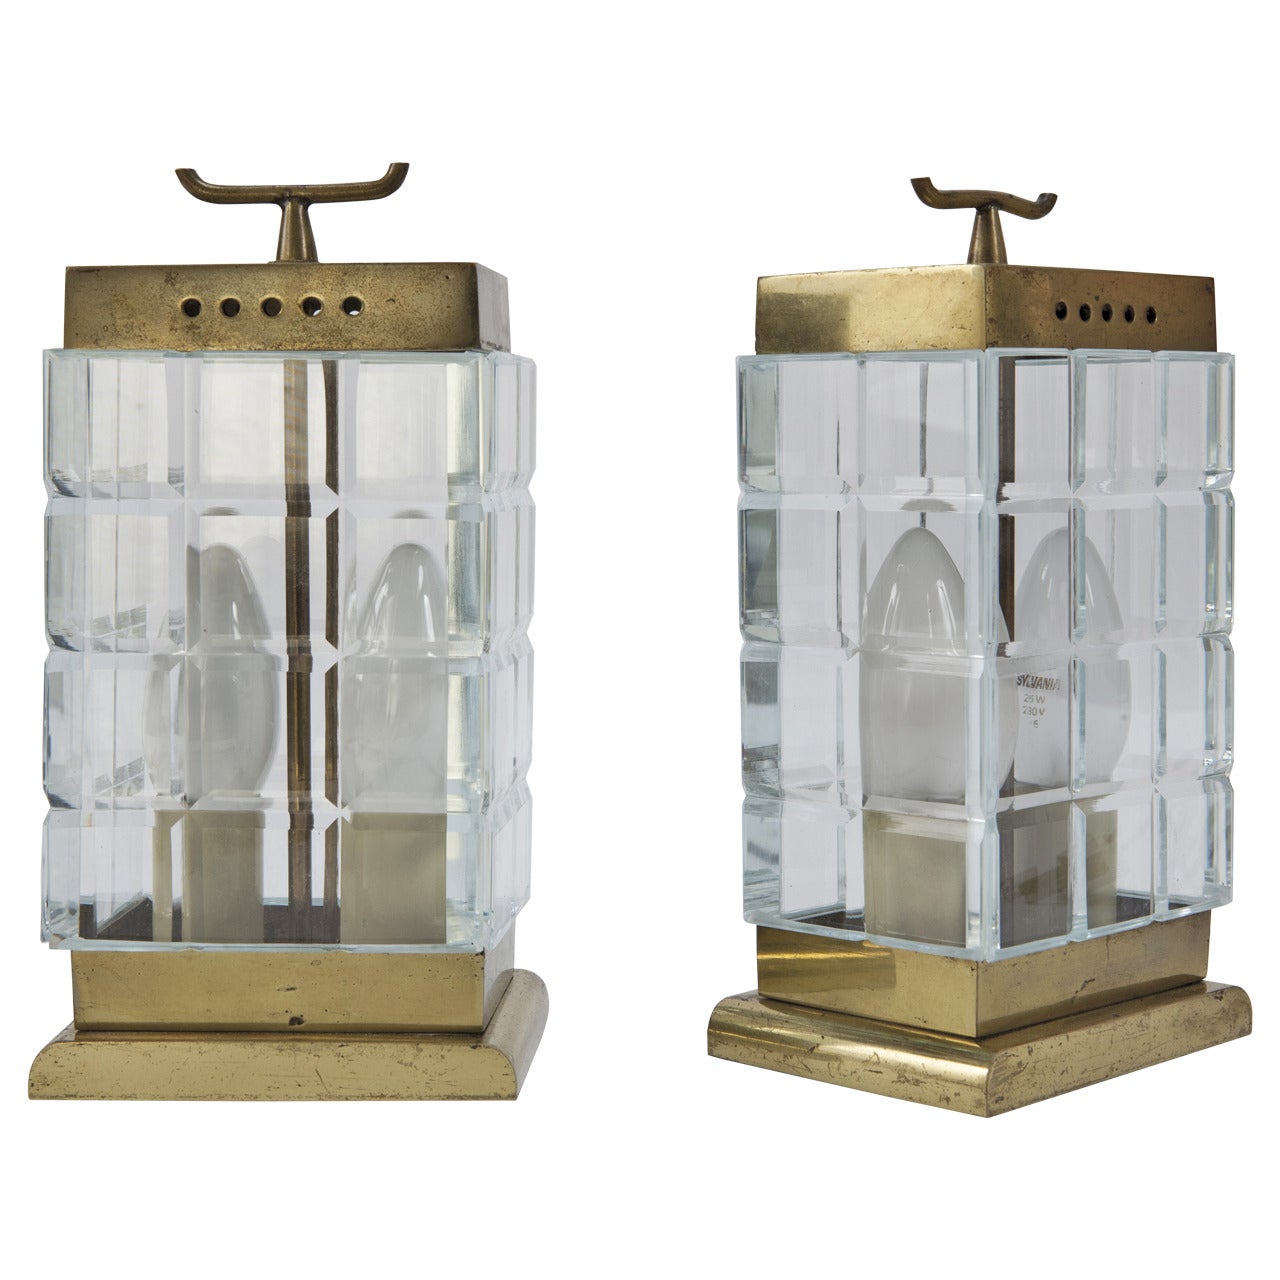 Pietro Chiesa Pair of Lamps Manufactured by Fontana Arte, circa 1937-1938